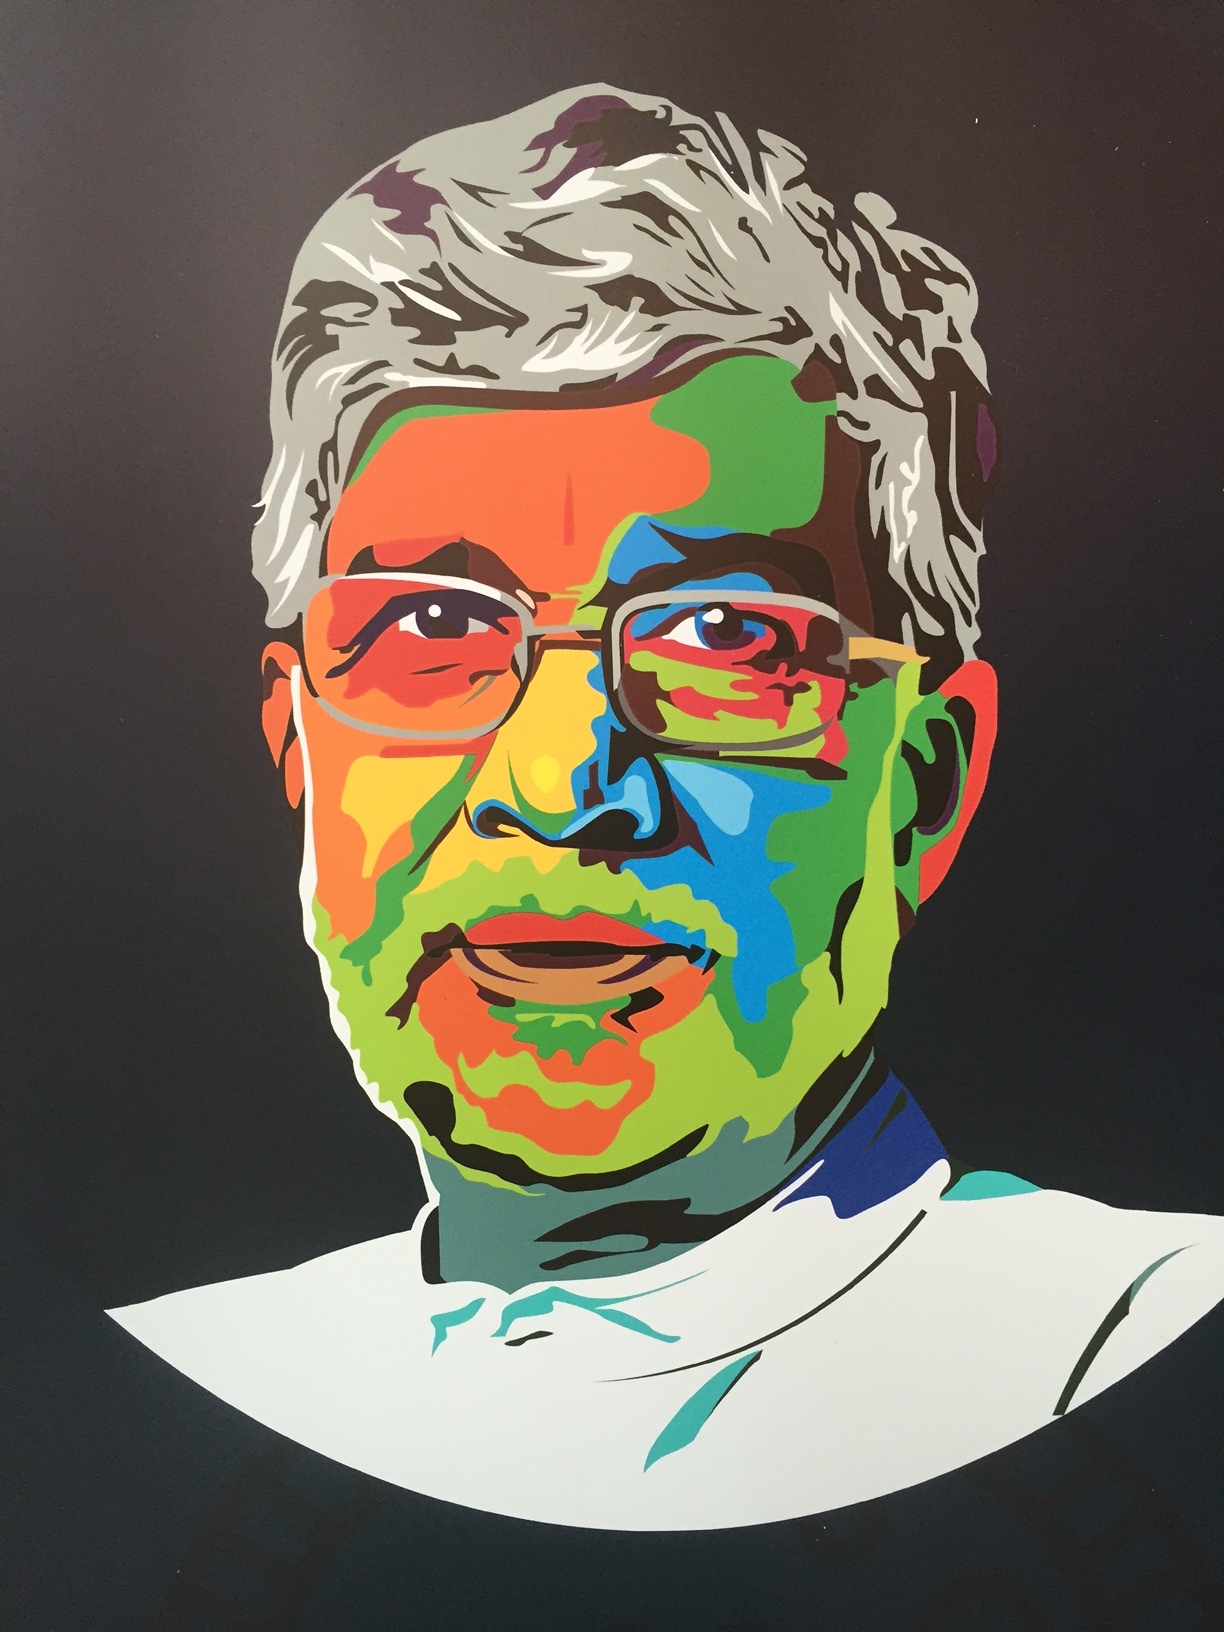 2014 Nobel Peace Prize Laureate Kailash Satyarthi has long been a collaborator of the Child Labor Coalition